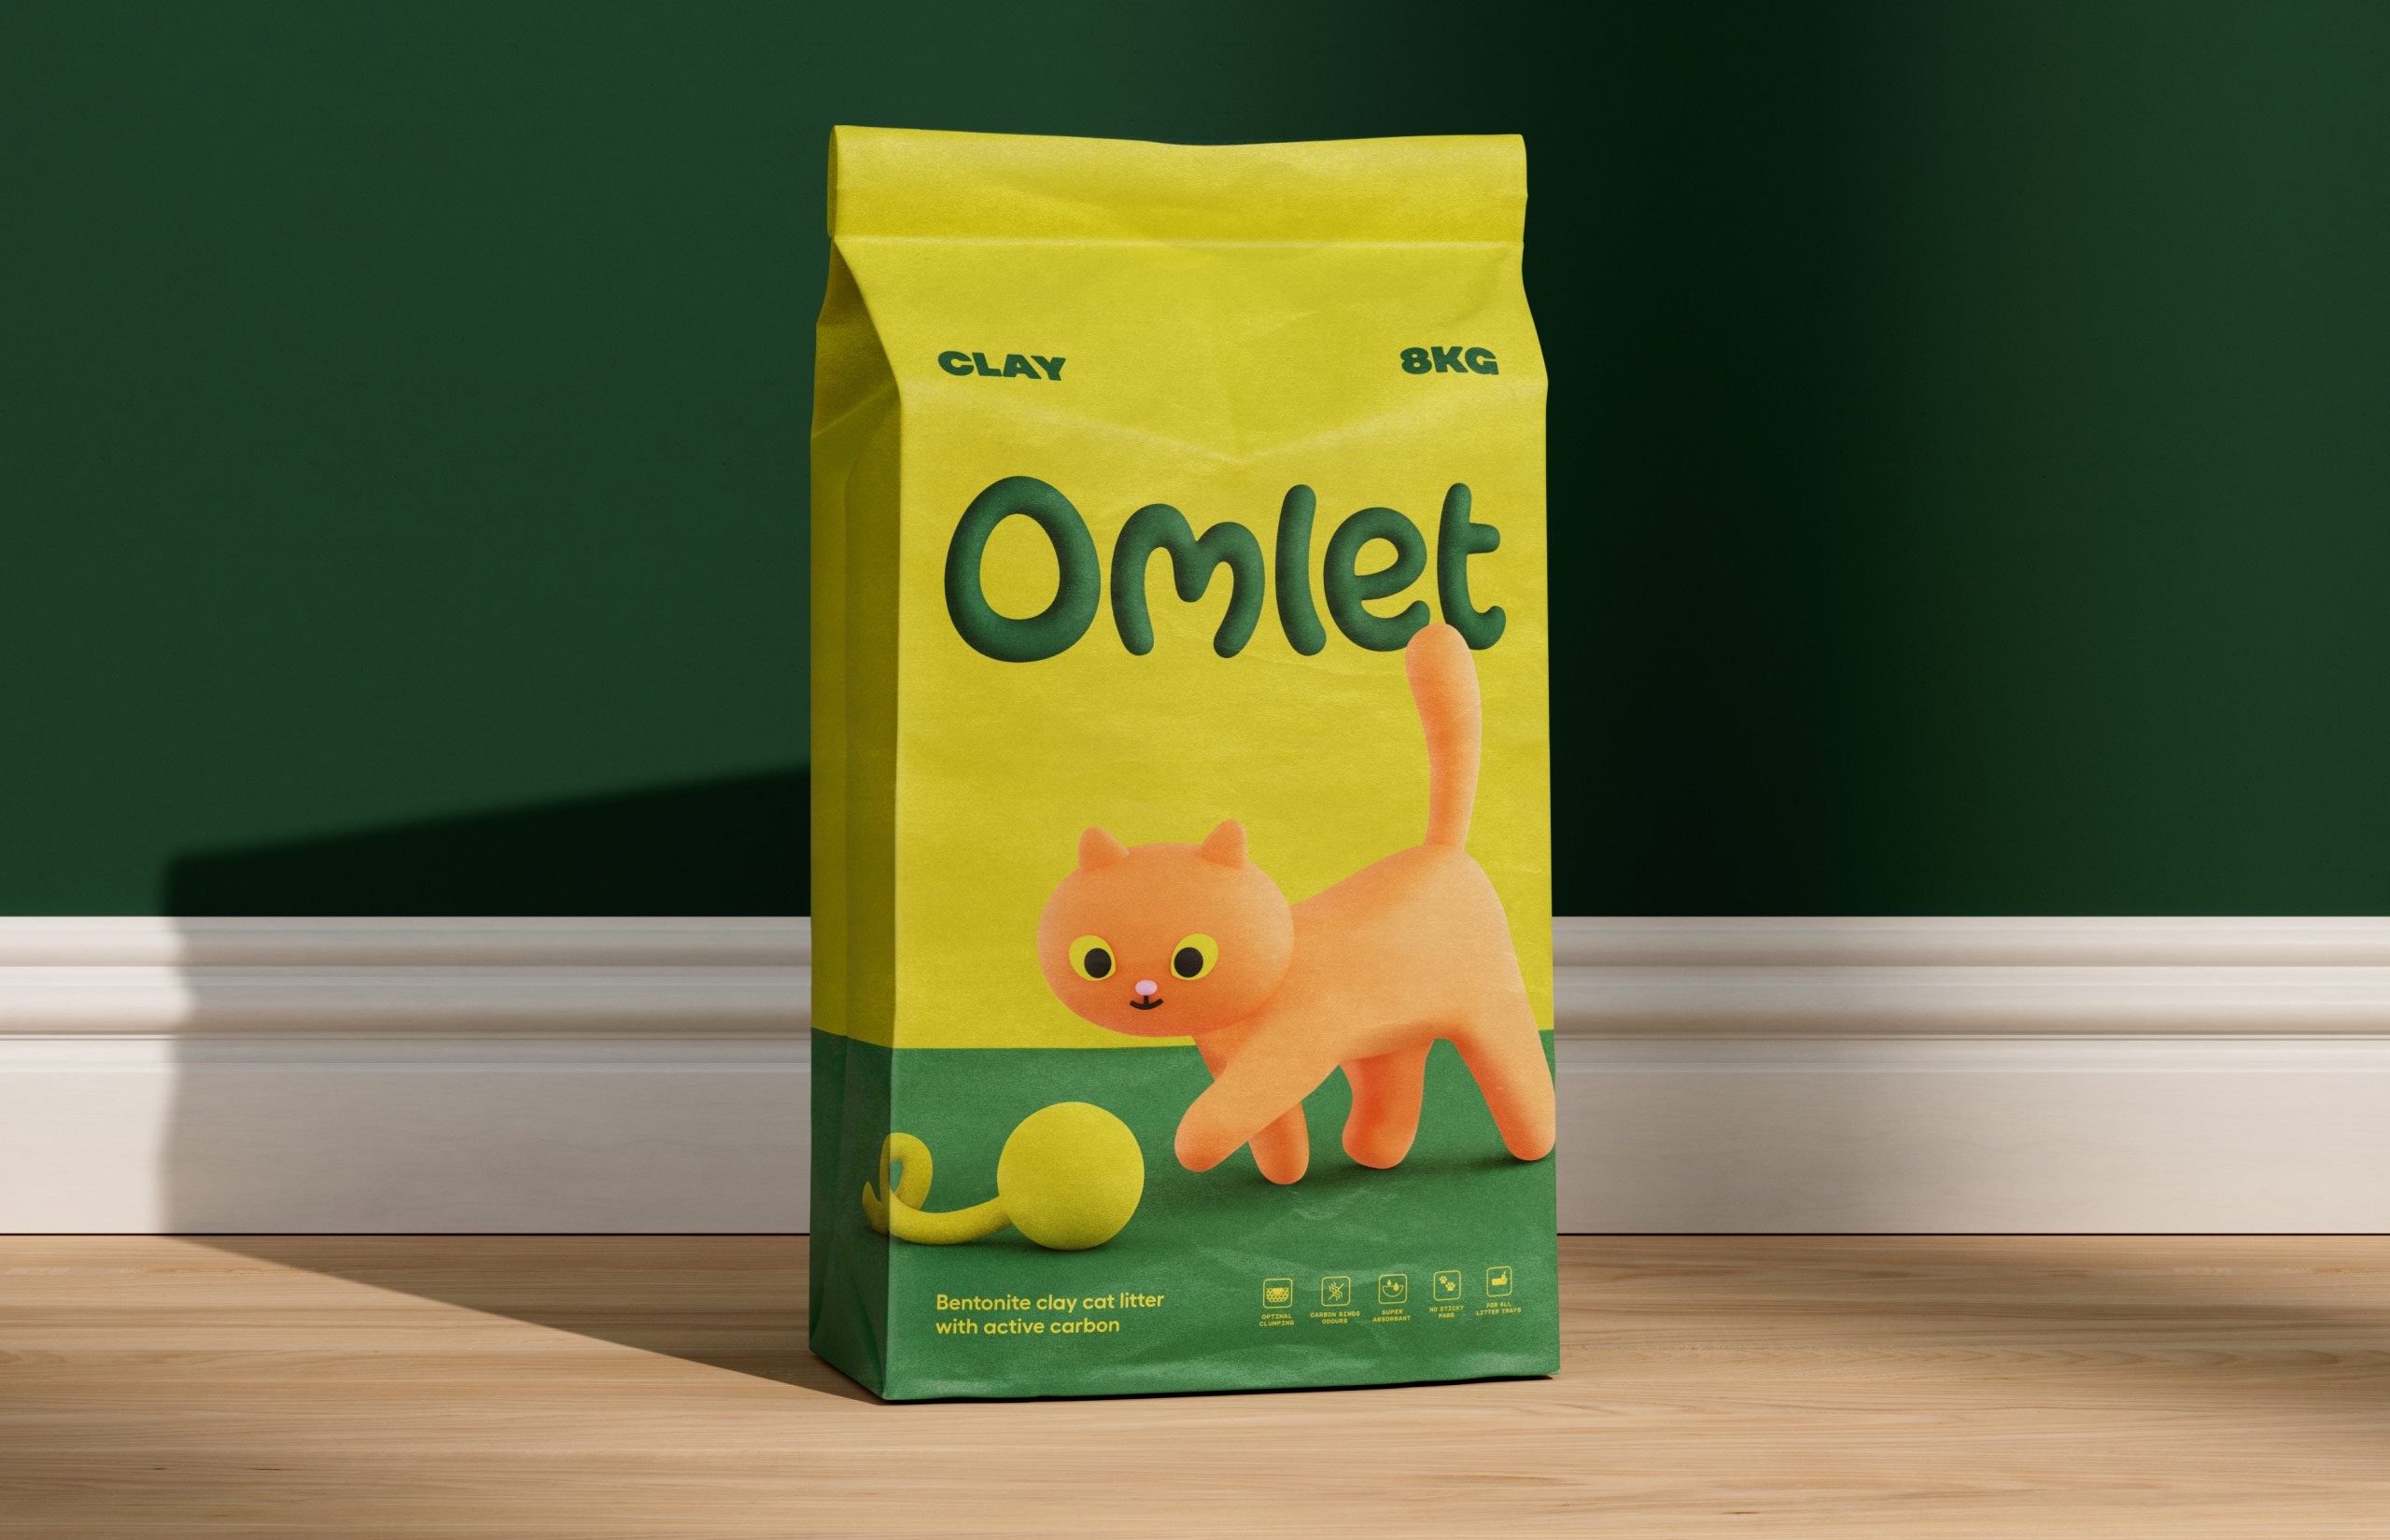 Packaging design for pet products brand Omlet by Ragged Edge